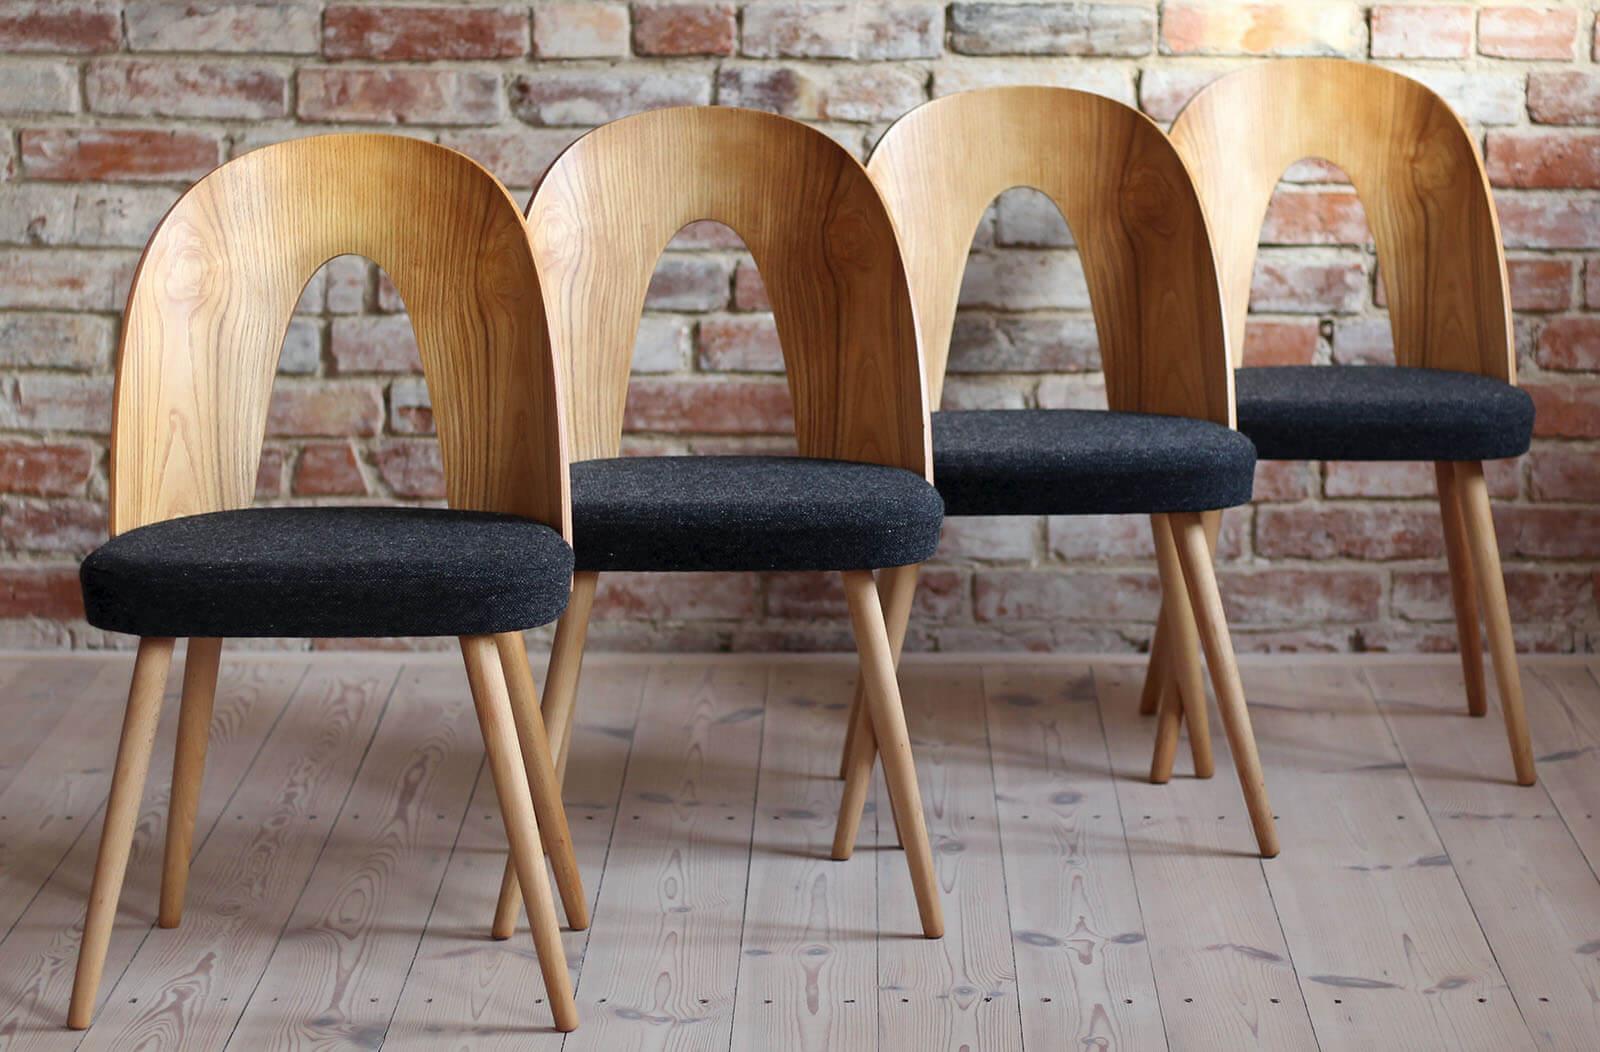 Czech Set of 4 Midcentury Dining Chairs by A. Šuman in Melange-Black Wool by Kvadrat